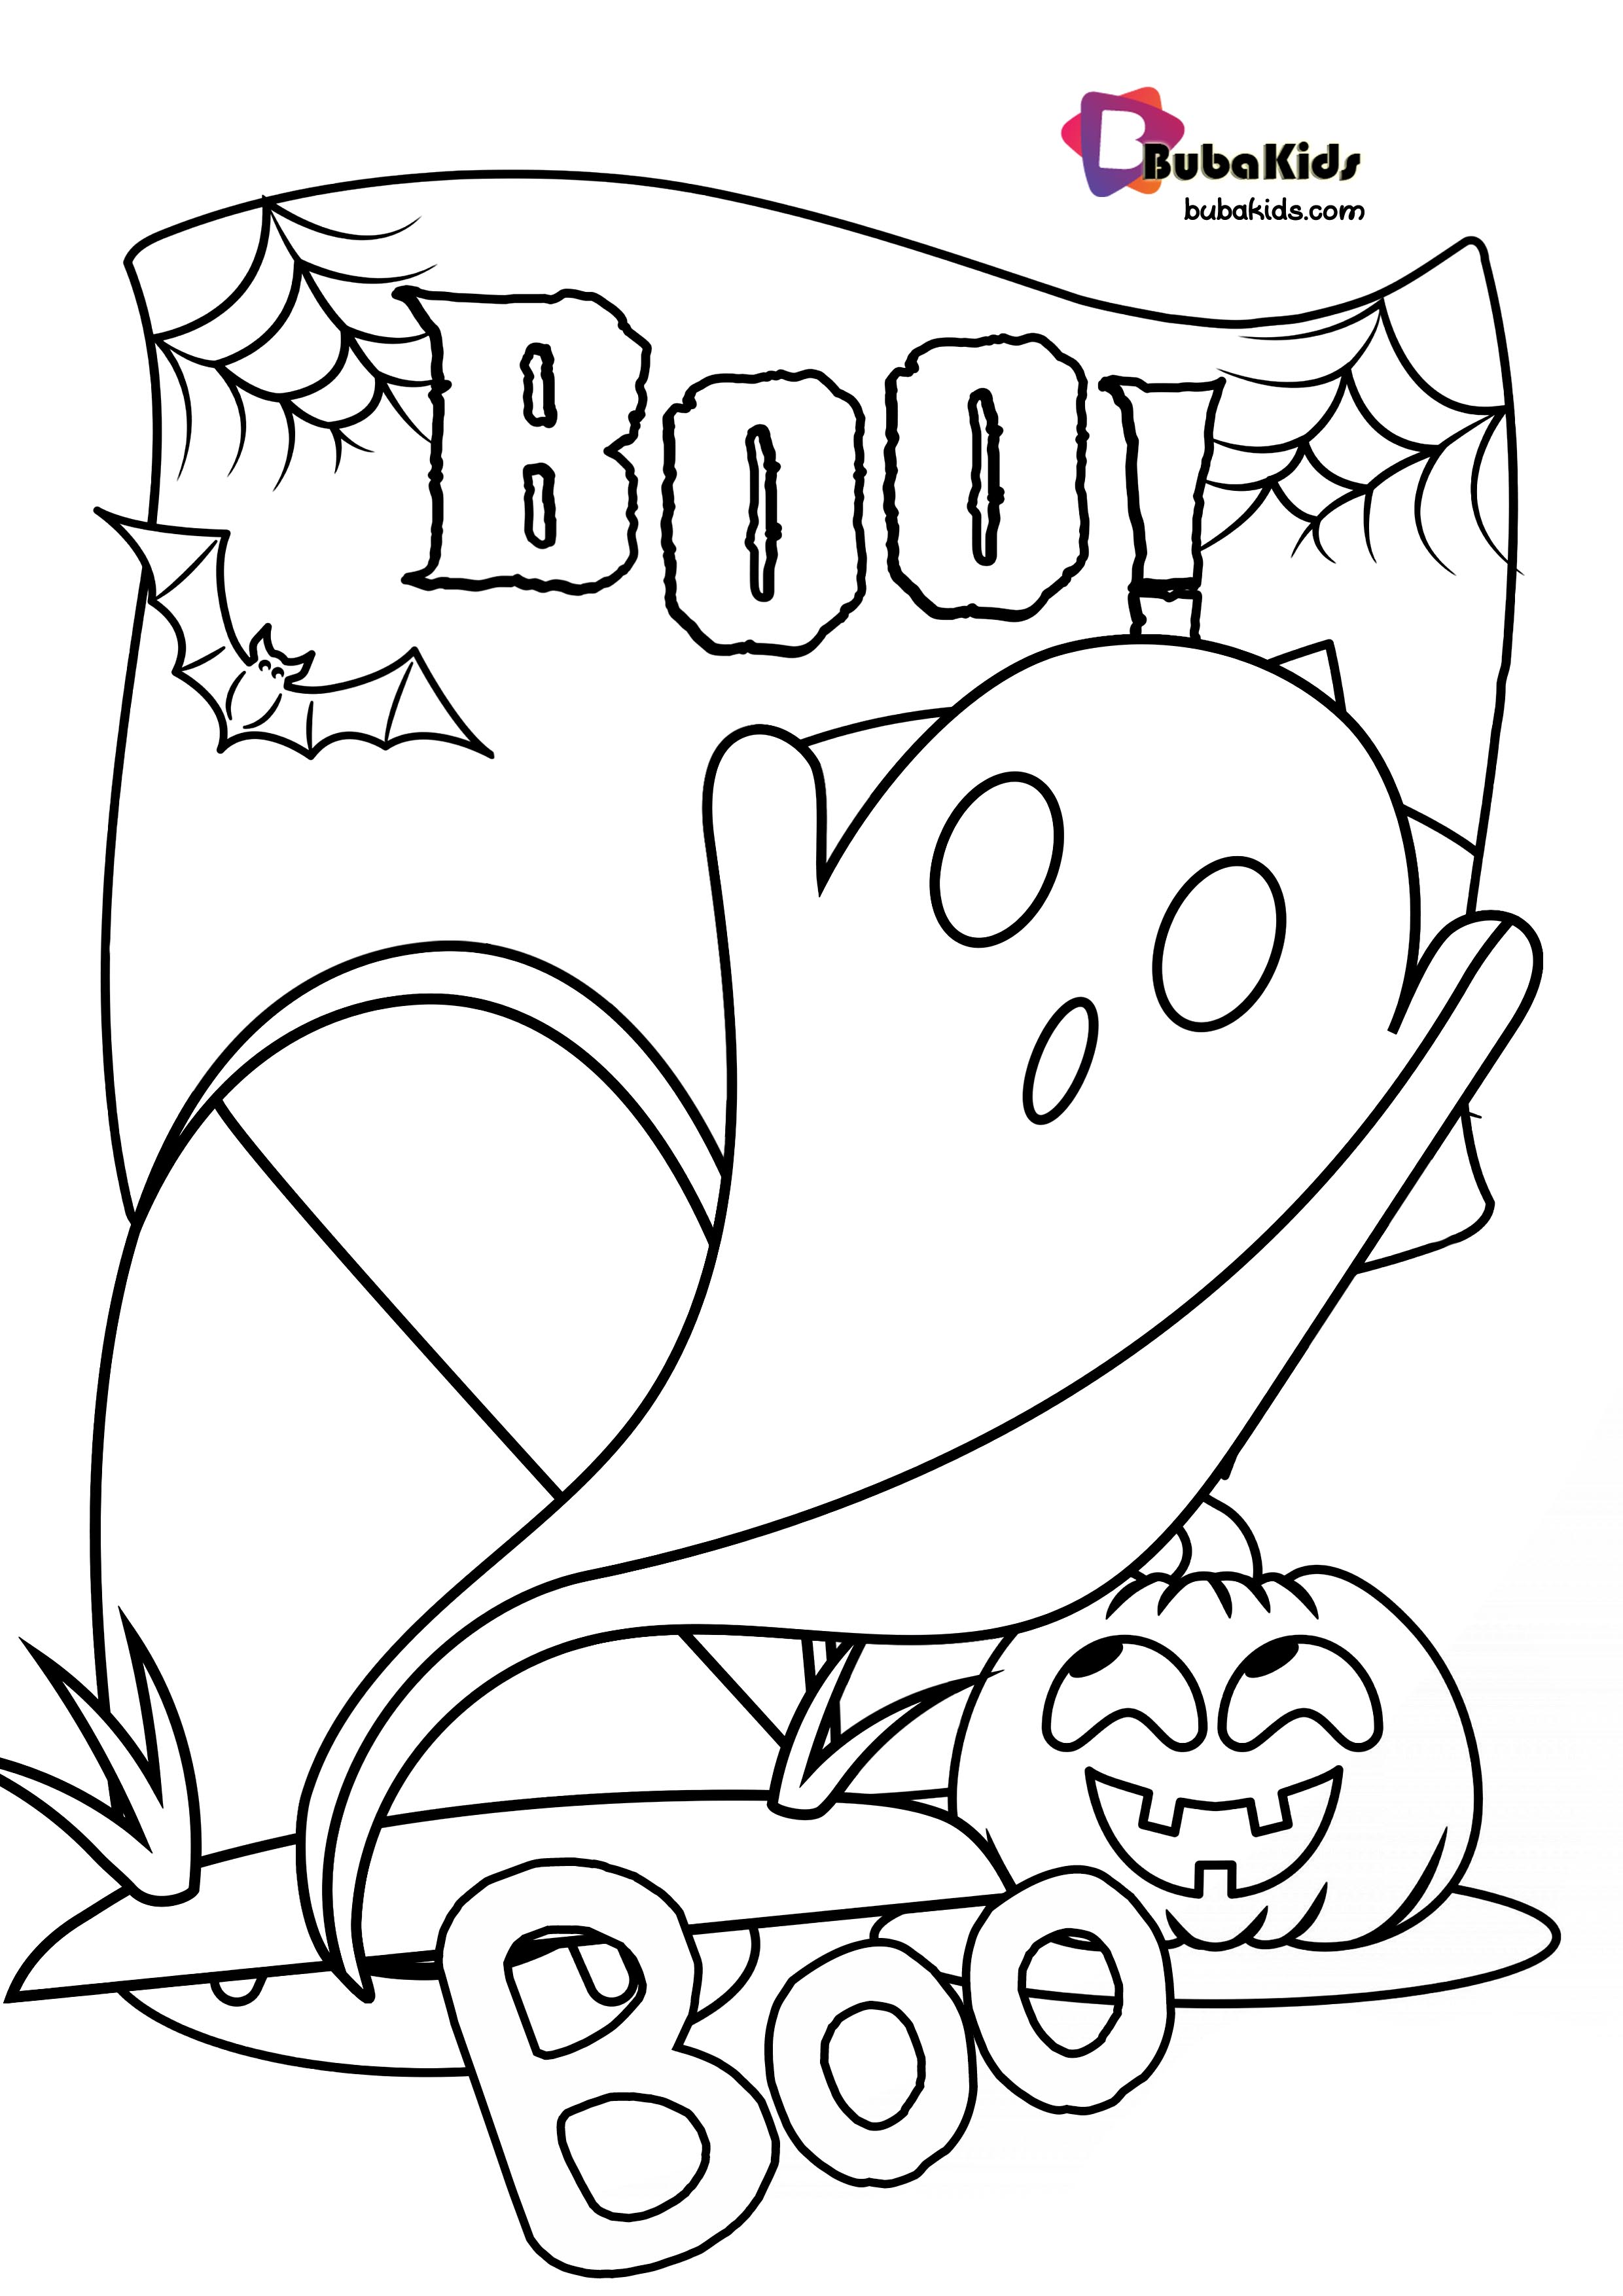 Boo Halloween Coloring Page Wallpaper